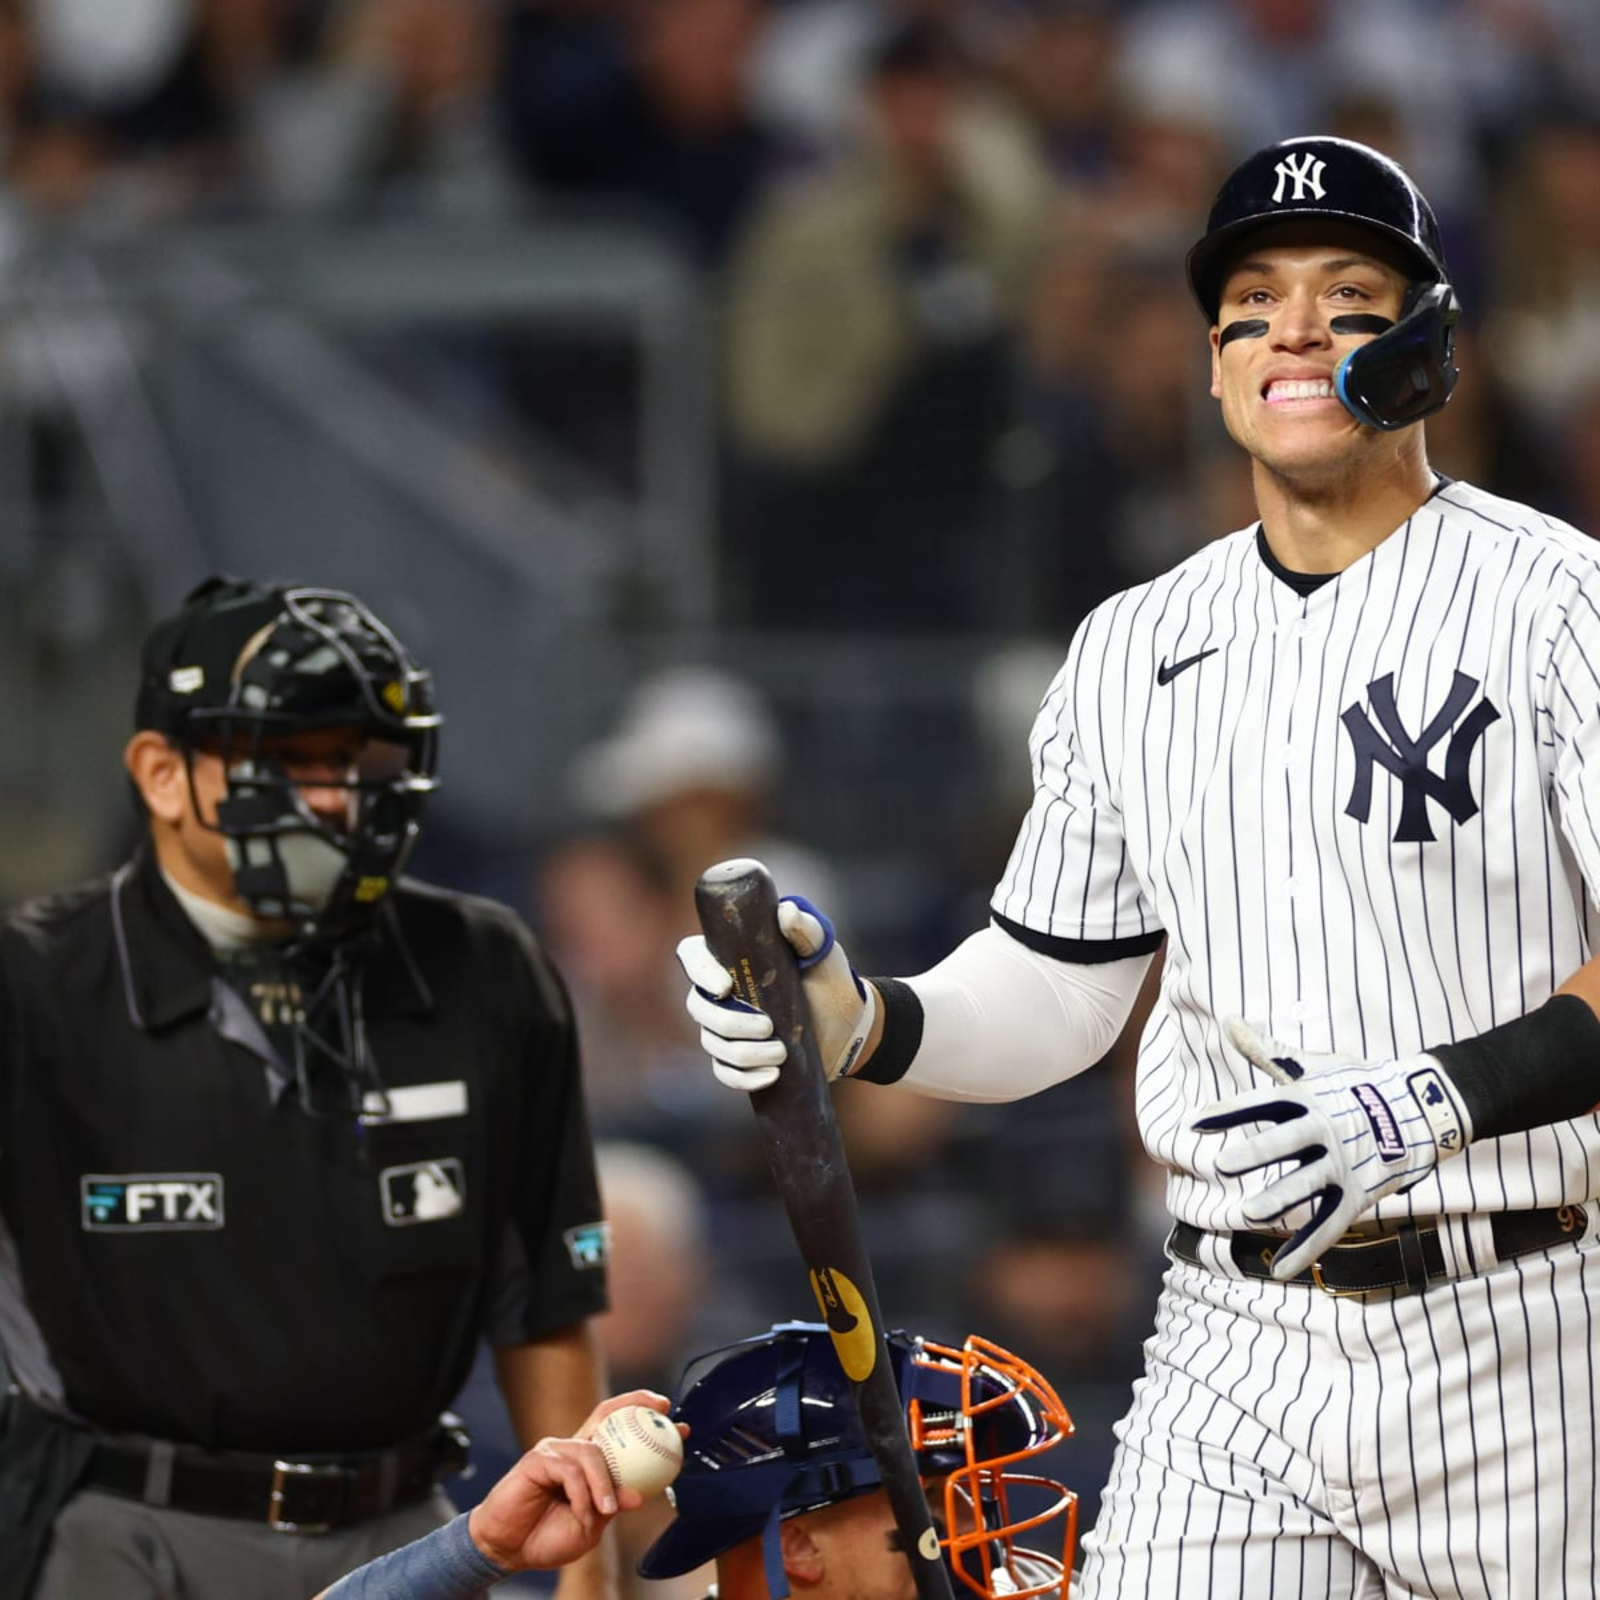 Aaron Judge, Yankees Blasted by Fans, Twitter After Game 3 ALCS